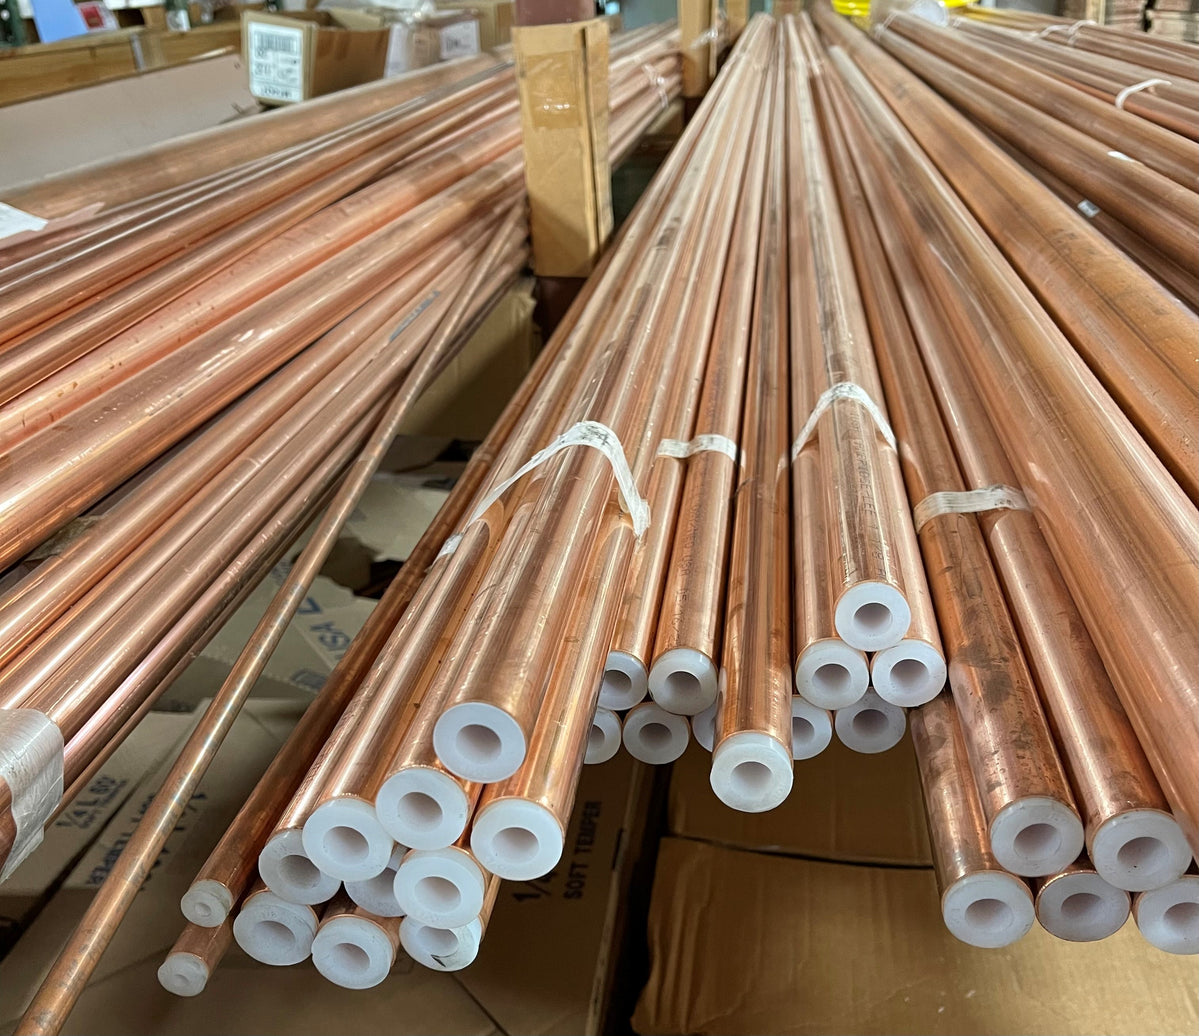 ACR Copper tube for Air-Conditioner- Hybird Resources